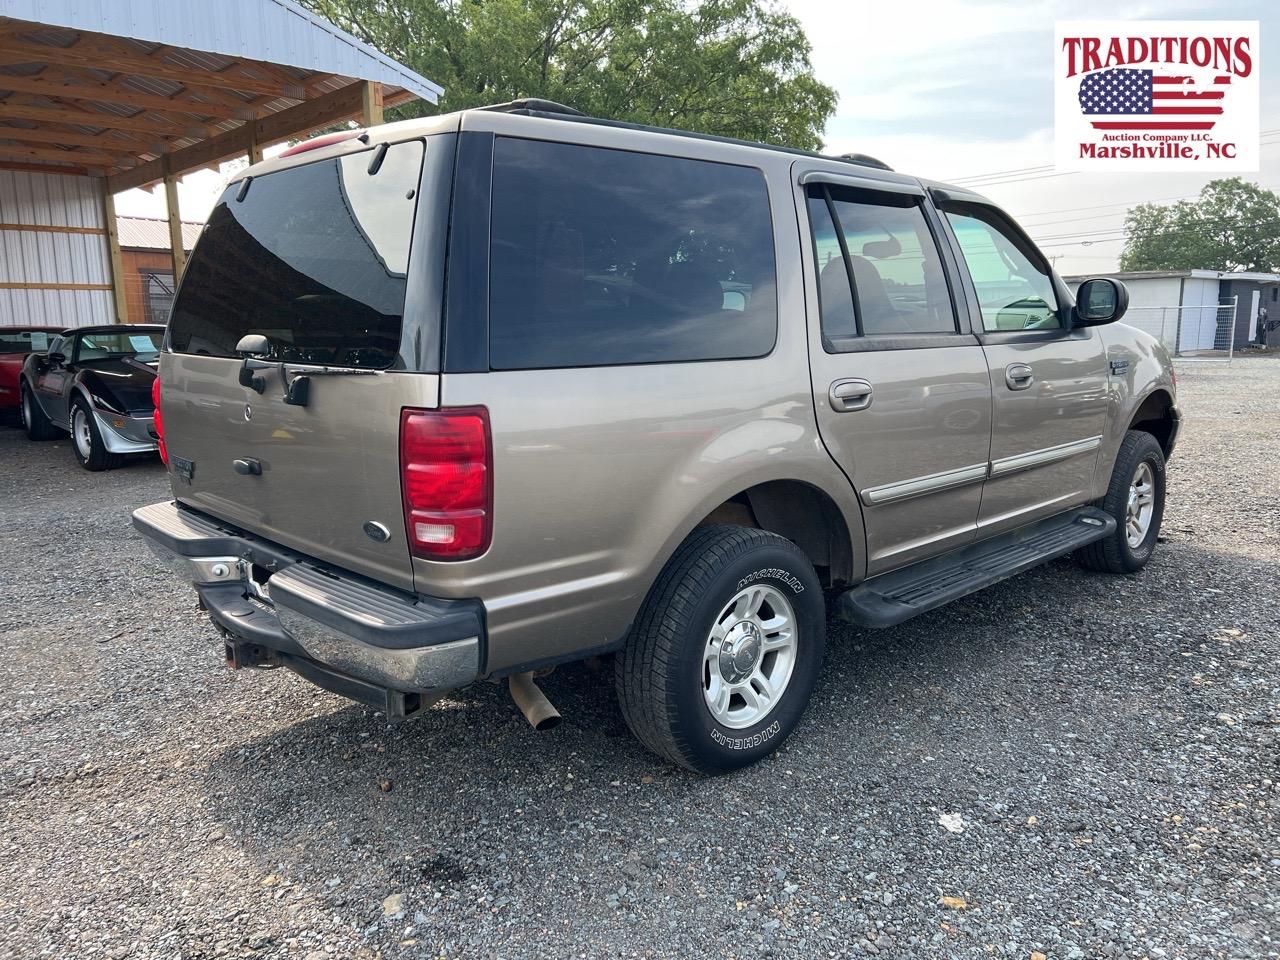 2002 Ford Expedition 4x4 XLT VIN 0558